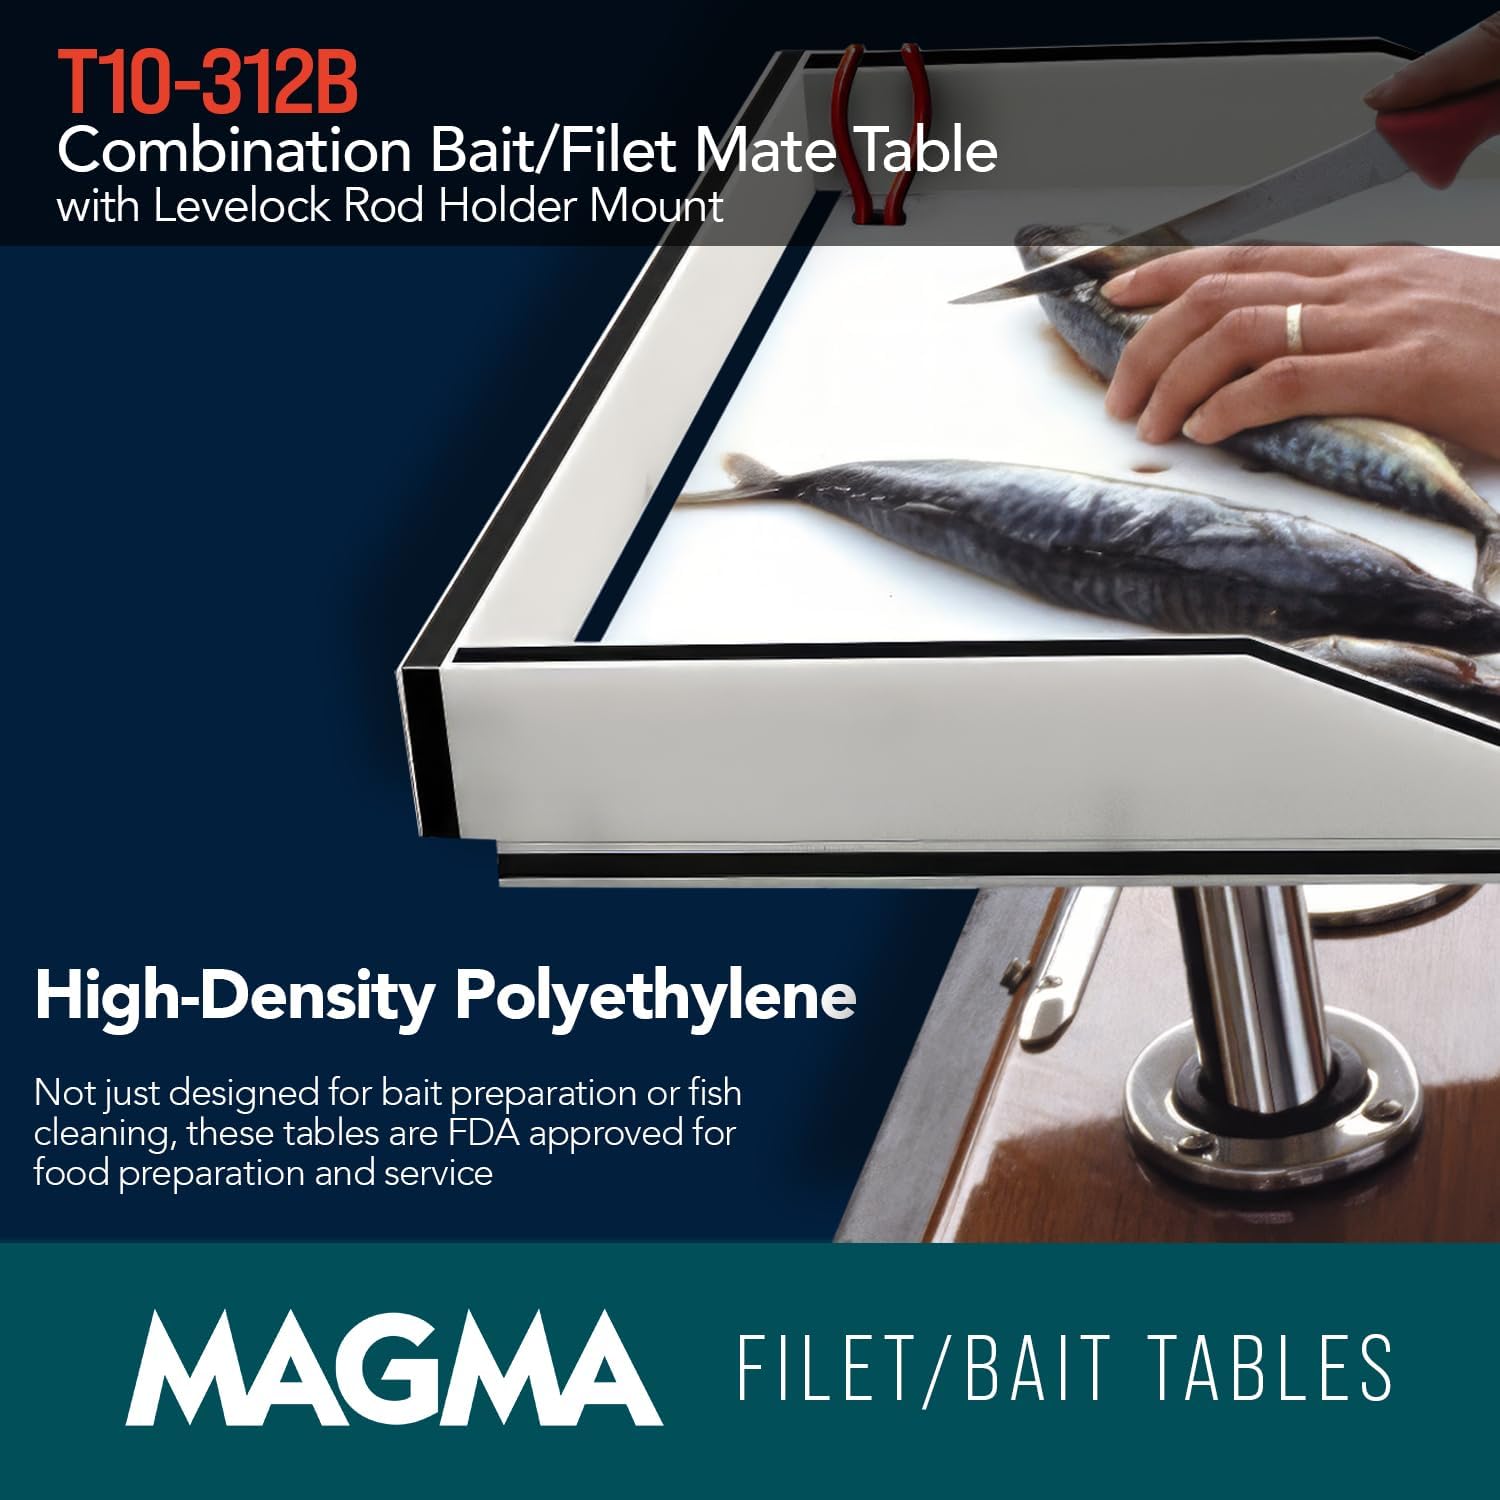 Magma Products, T10-312B Combination Bait/Filet Mate Table with Levelock Rod Holder Mount, 20 Inch x 12-3/4 Inch - Magma Products T10-312B Combination Bait/Filet Mate Table Review